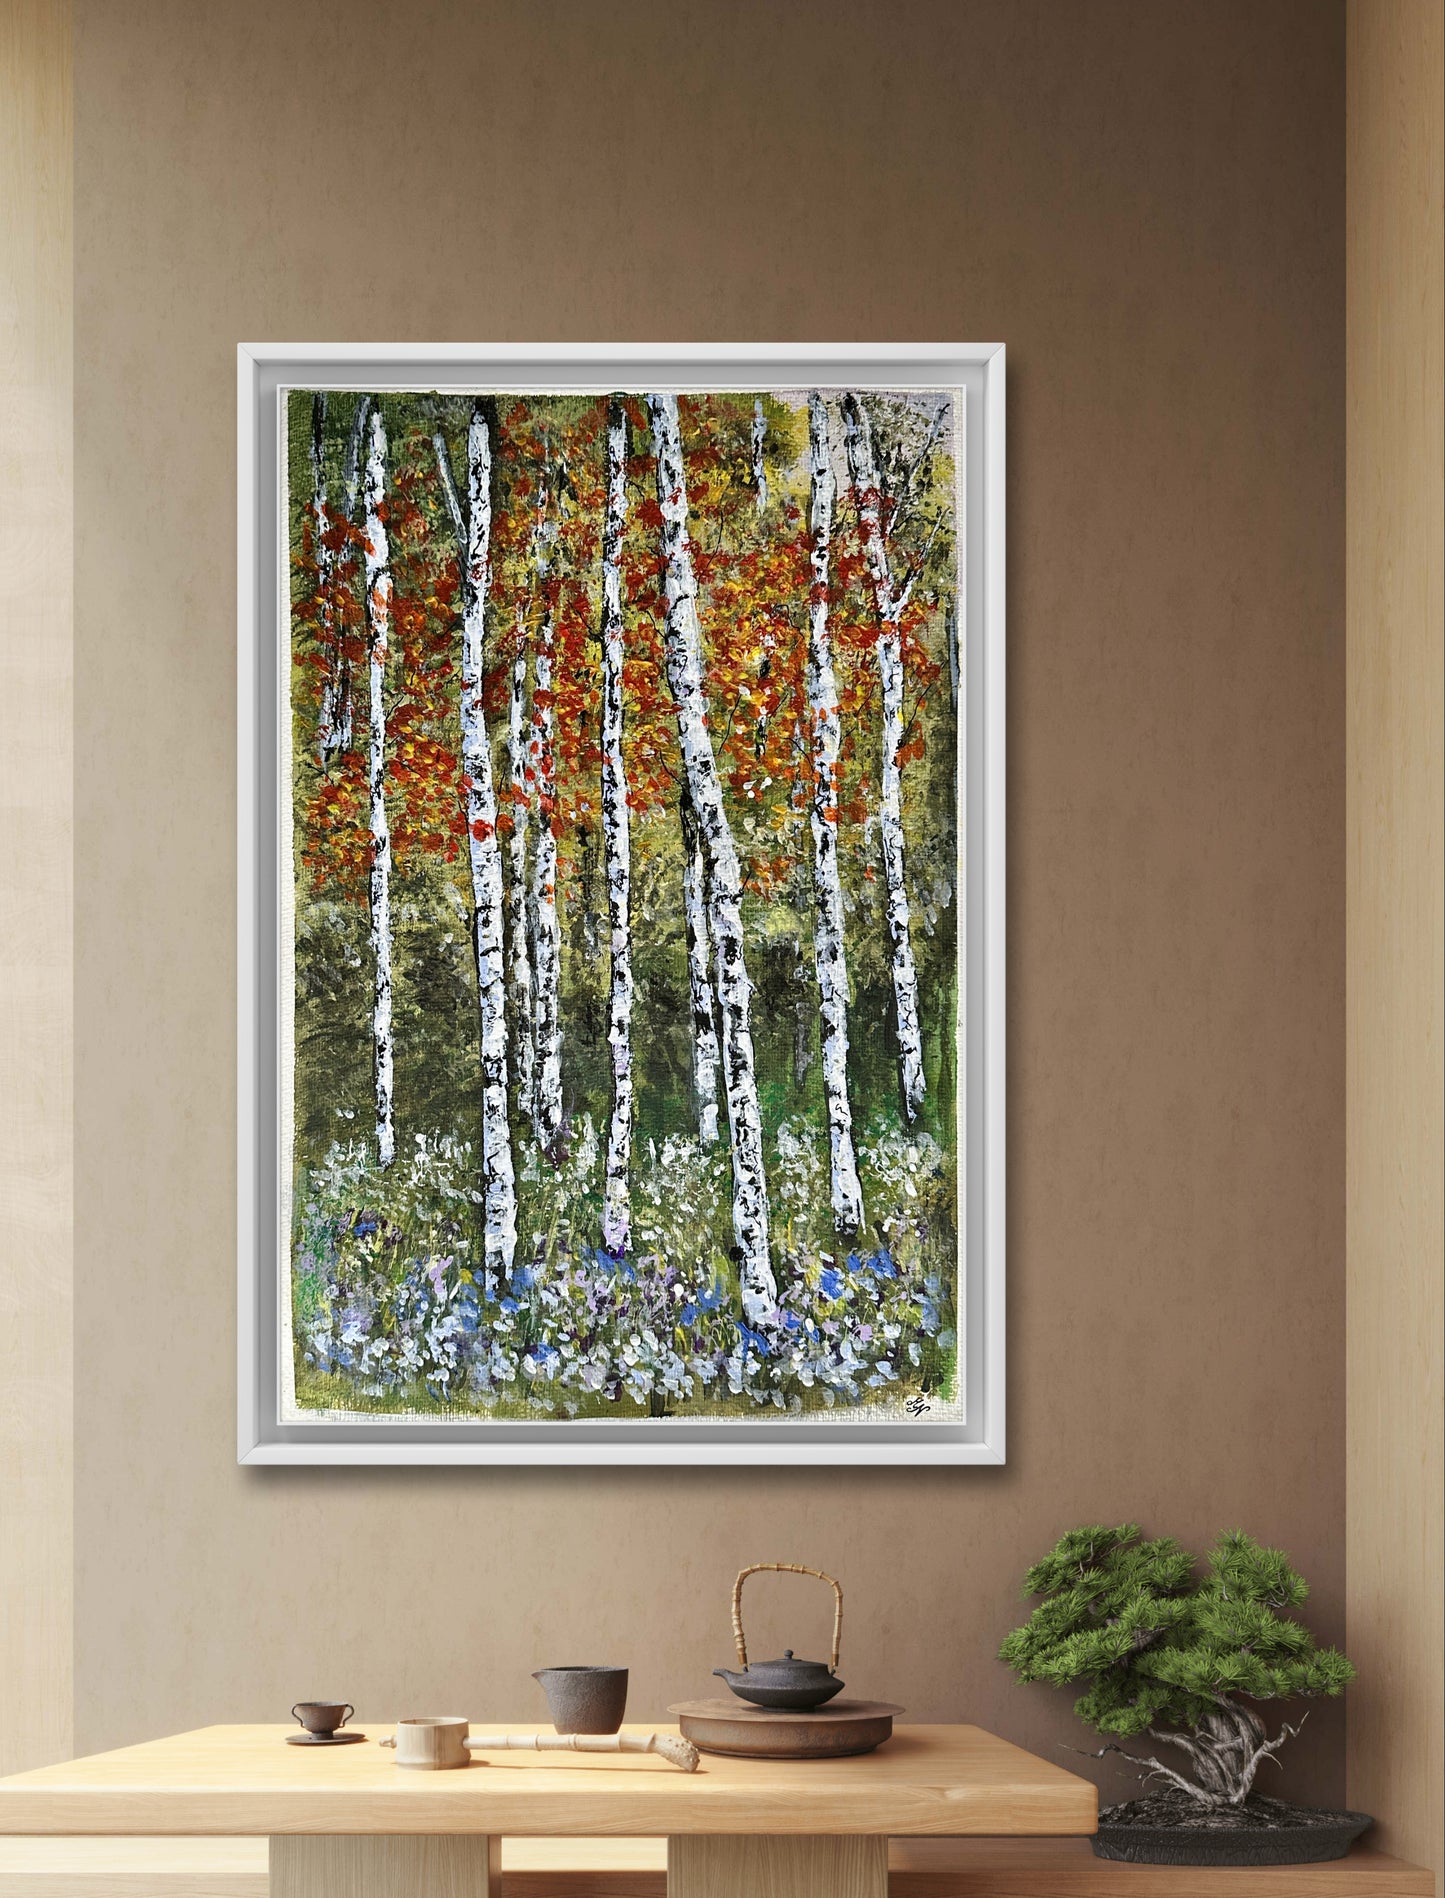 "Calming Aspen Grove" - Find solace and serenity among the tranquil aspen trees.